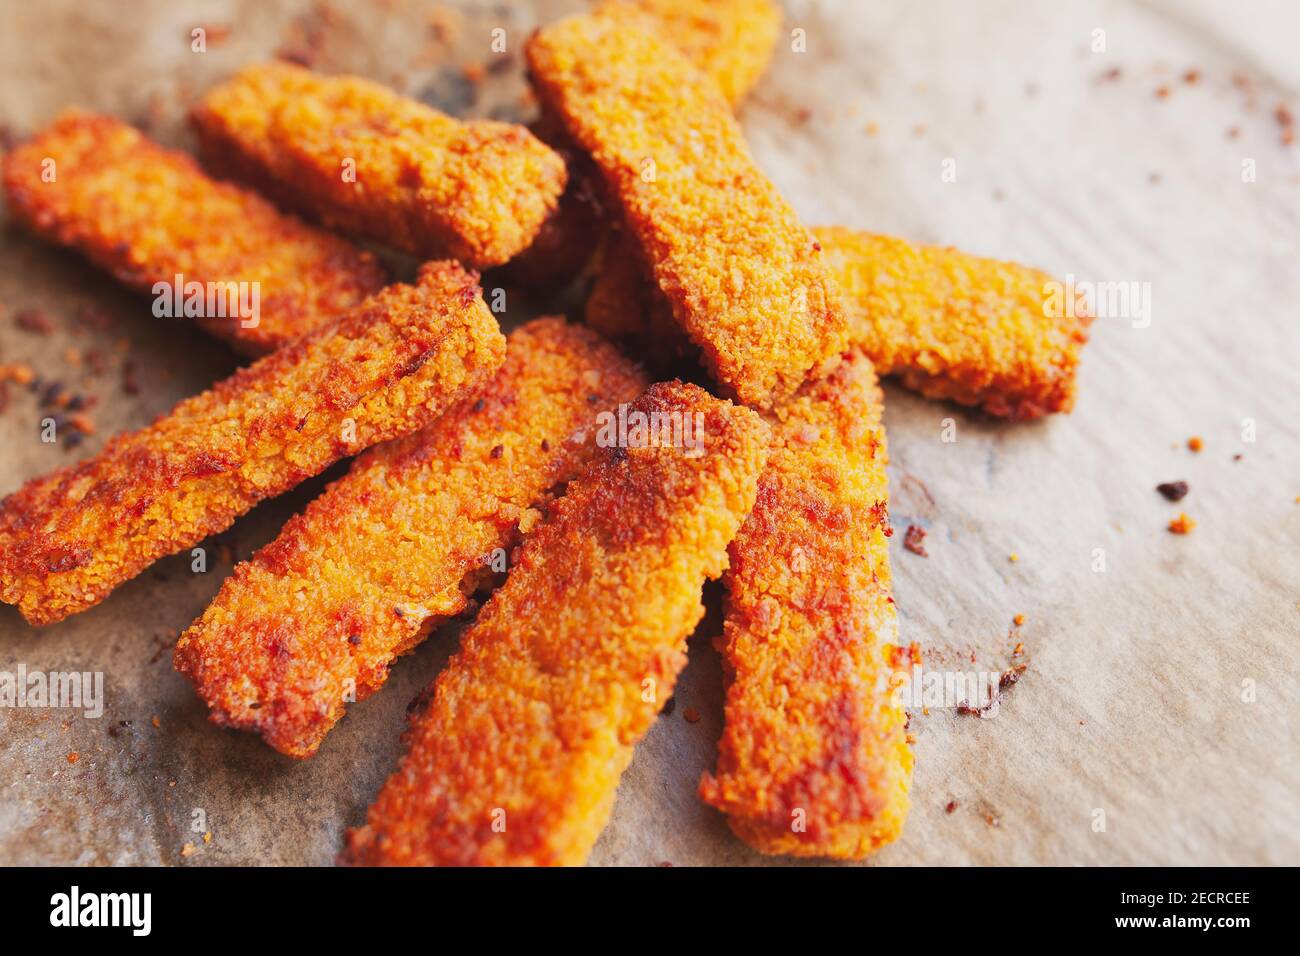 Bunch of deep fried, crispy fish fingers on greasy parchment paper Stock Photo